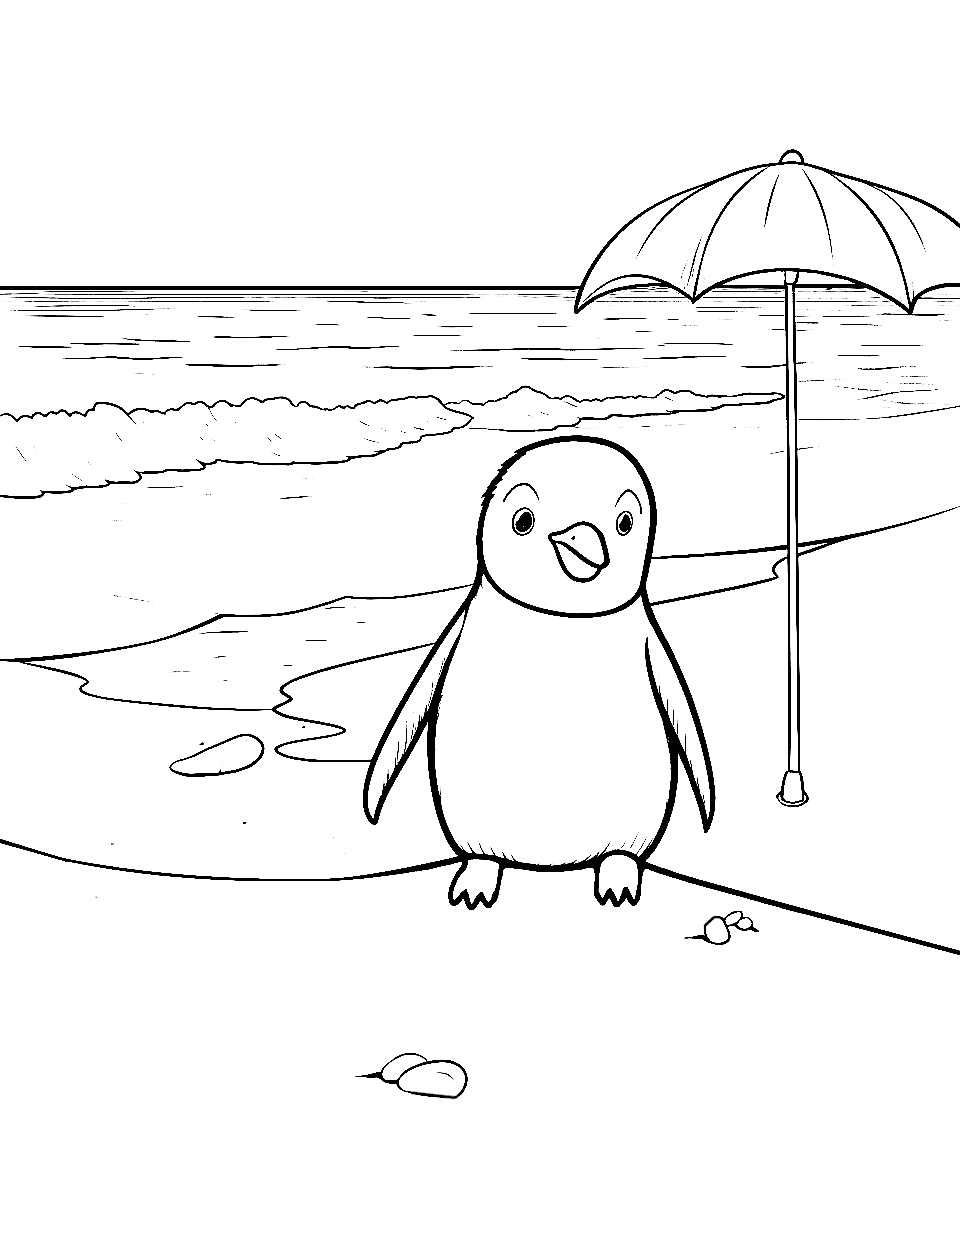 Penguin's Beach Day Coloring Page - A penguin enjoying a rare warm day on a sandy beach.